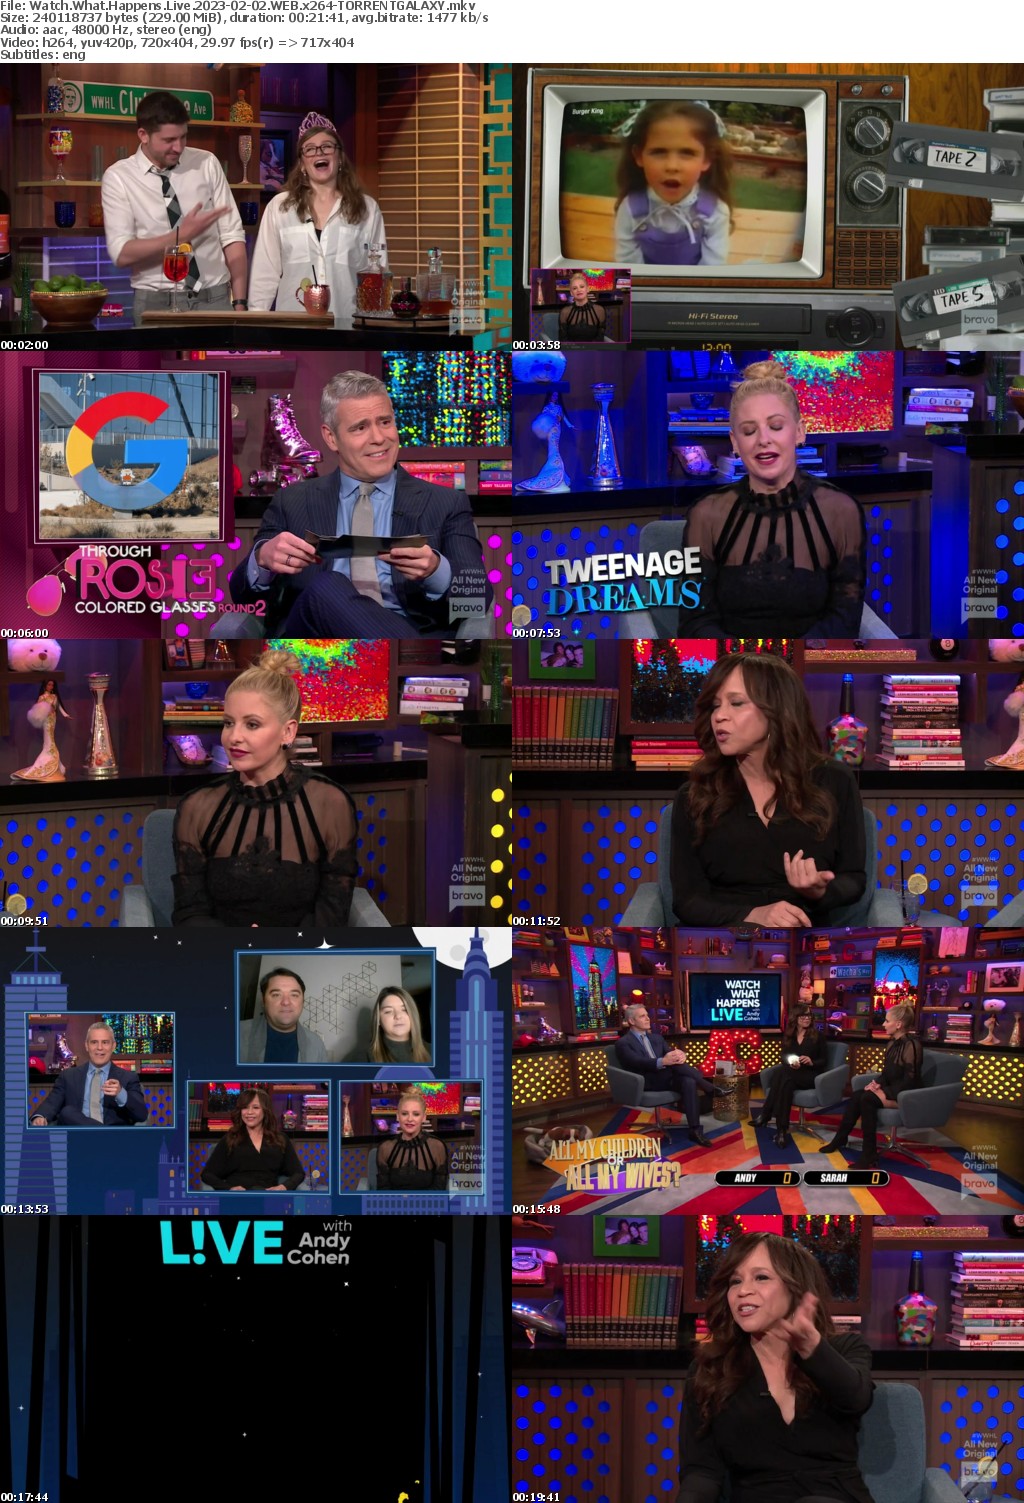 Watch What Happens Live 2023-02-02 WEB x264-GALAXY